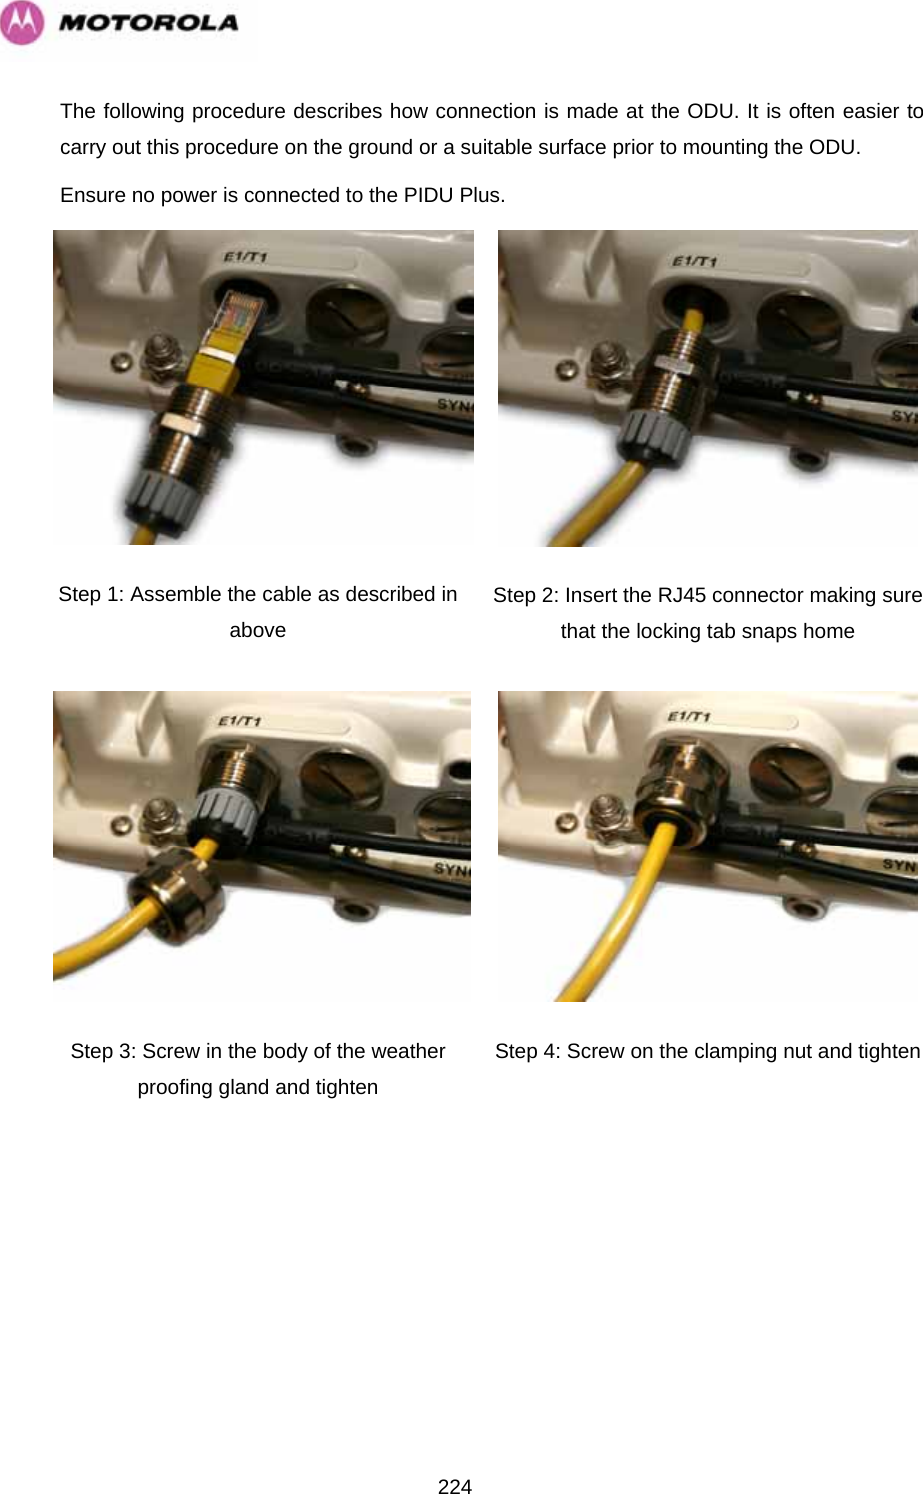   224The following procedure describes how connection is made at the ODU. It is often easier to carry out this procedure on the ground or a suitable surface prior to mounting the ODU.  Ensure no power is connected to the PIDU Plus.  Step 1: Assemble the cable as described in above  Step 2: Insert the RJ45 connector making sure that the locking tab snaps home Step 3: Screw in the body of the weather proofing gland and tighten  Step 4: Screw on the clamping nut and tighten 